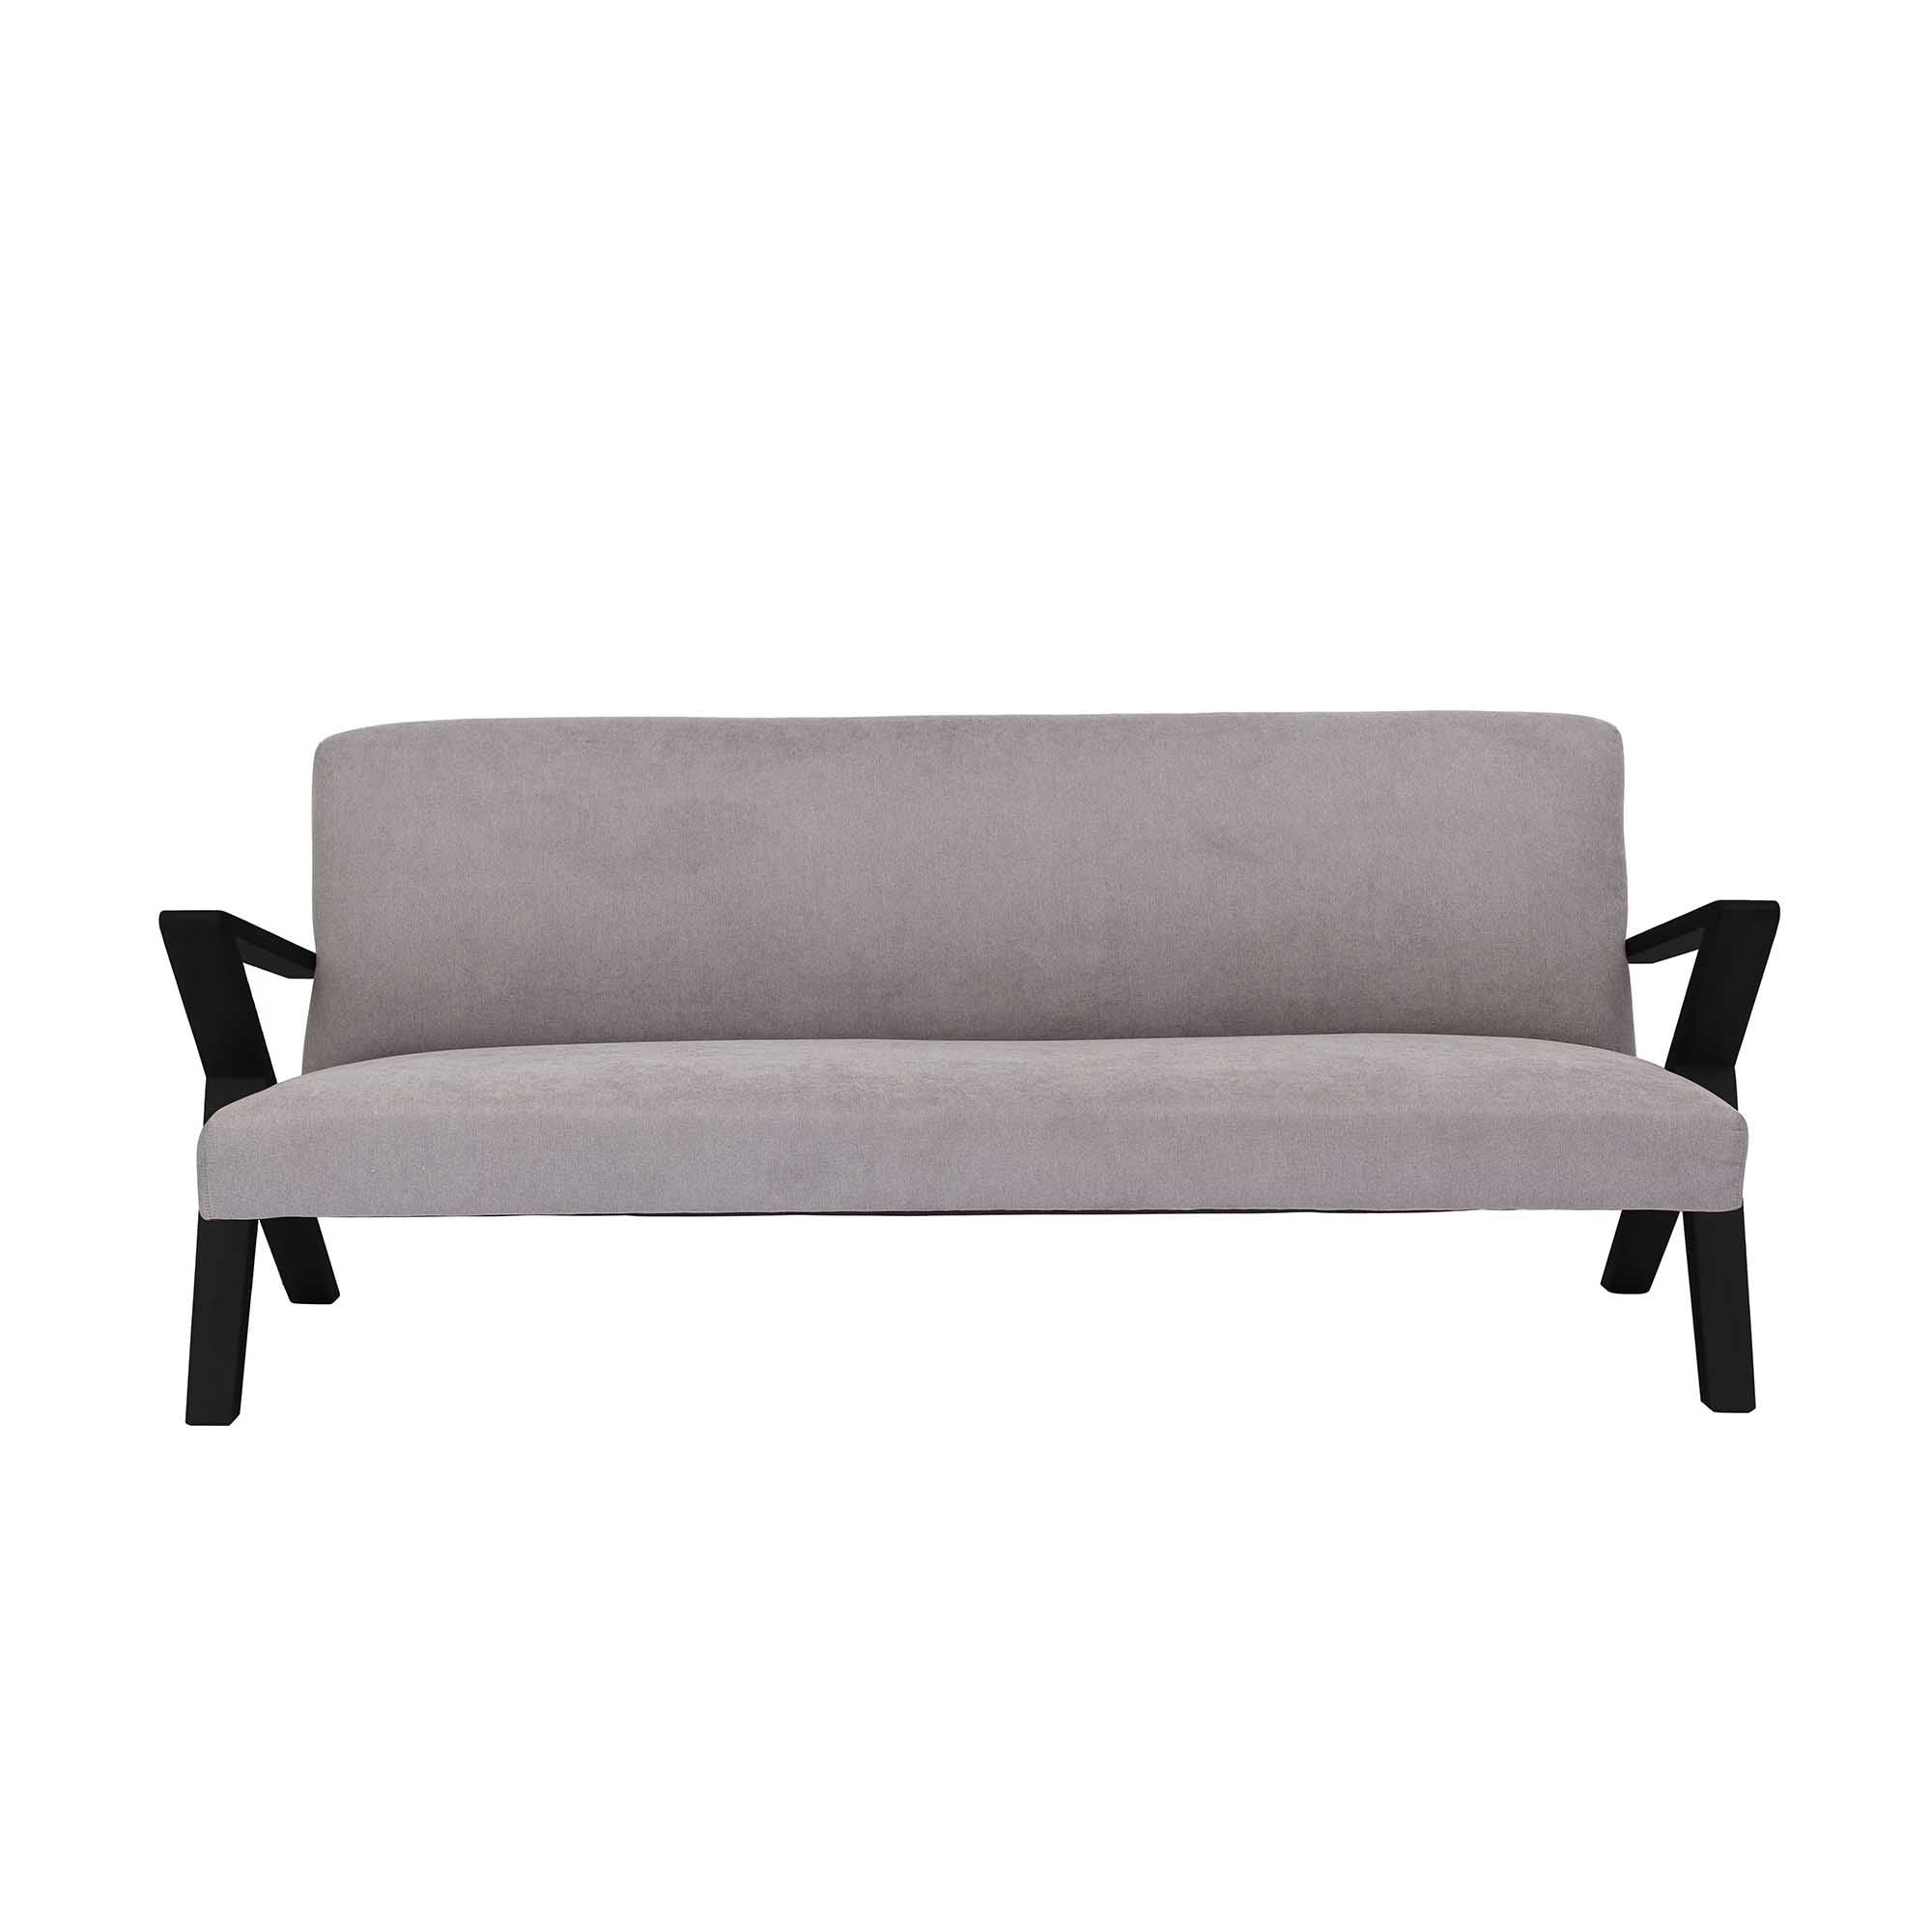  4-seater Sofa Beech Wood Frame, Black Lacquered grey fabric, front view